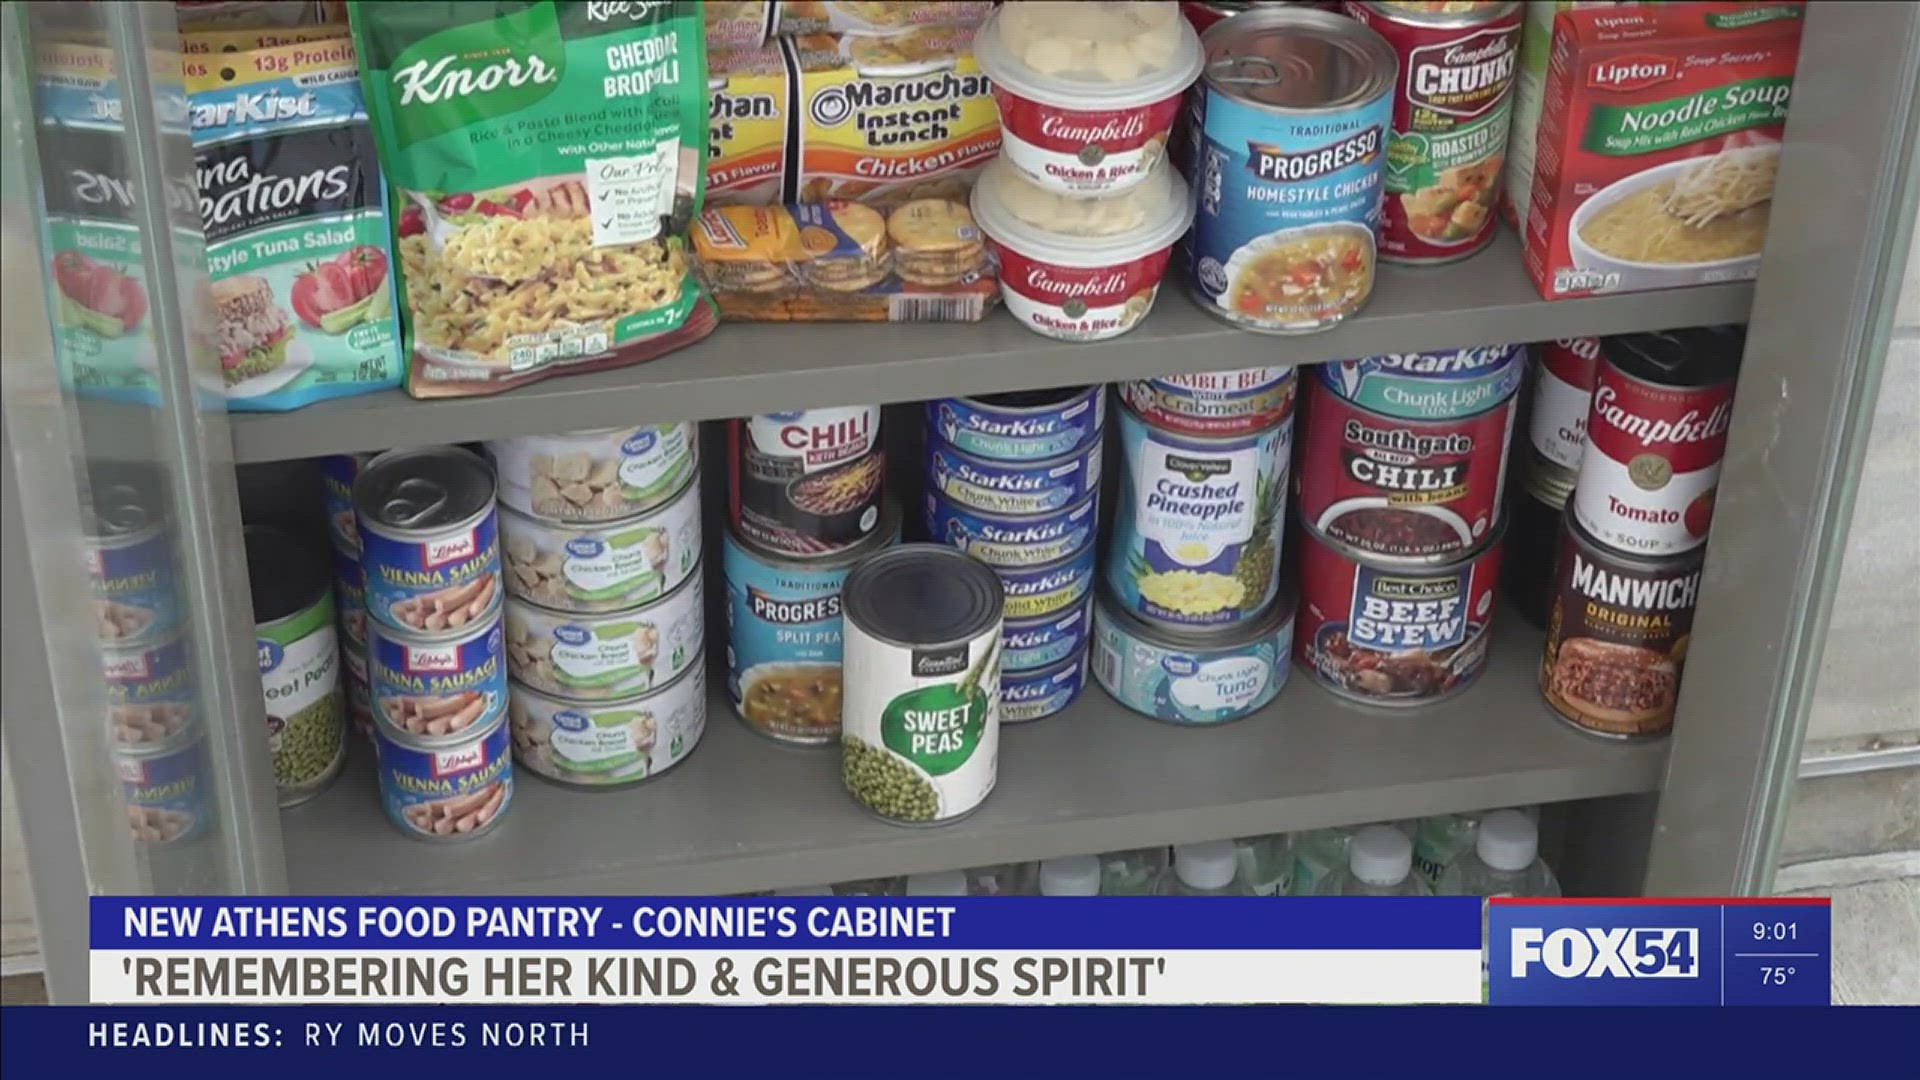 The Athens community shines a light in a dark place with the opening of 'Connie's Cabinet' food pantry.